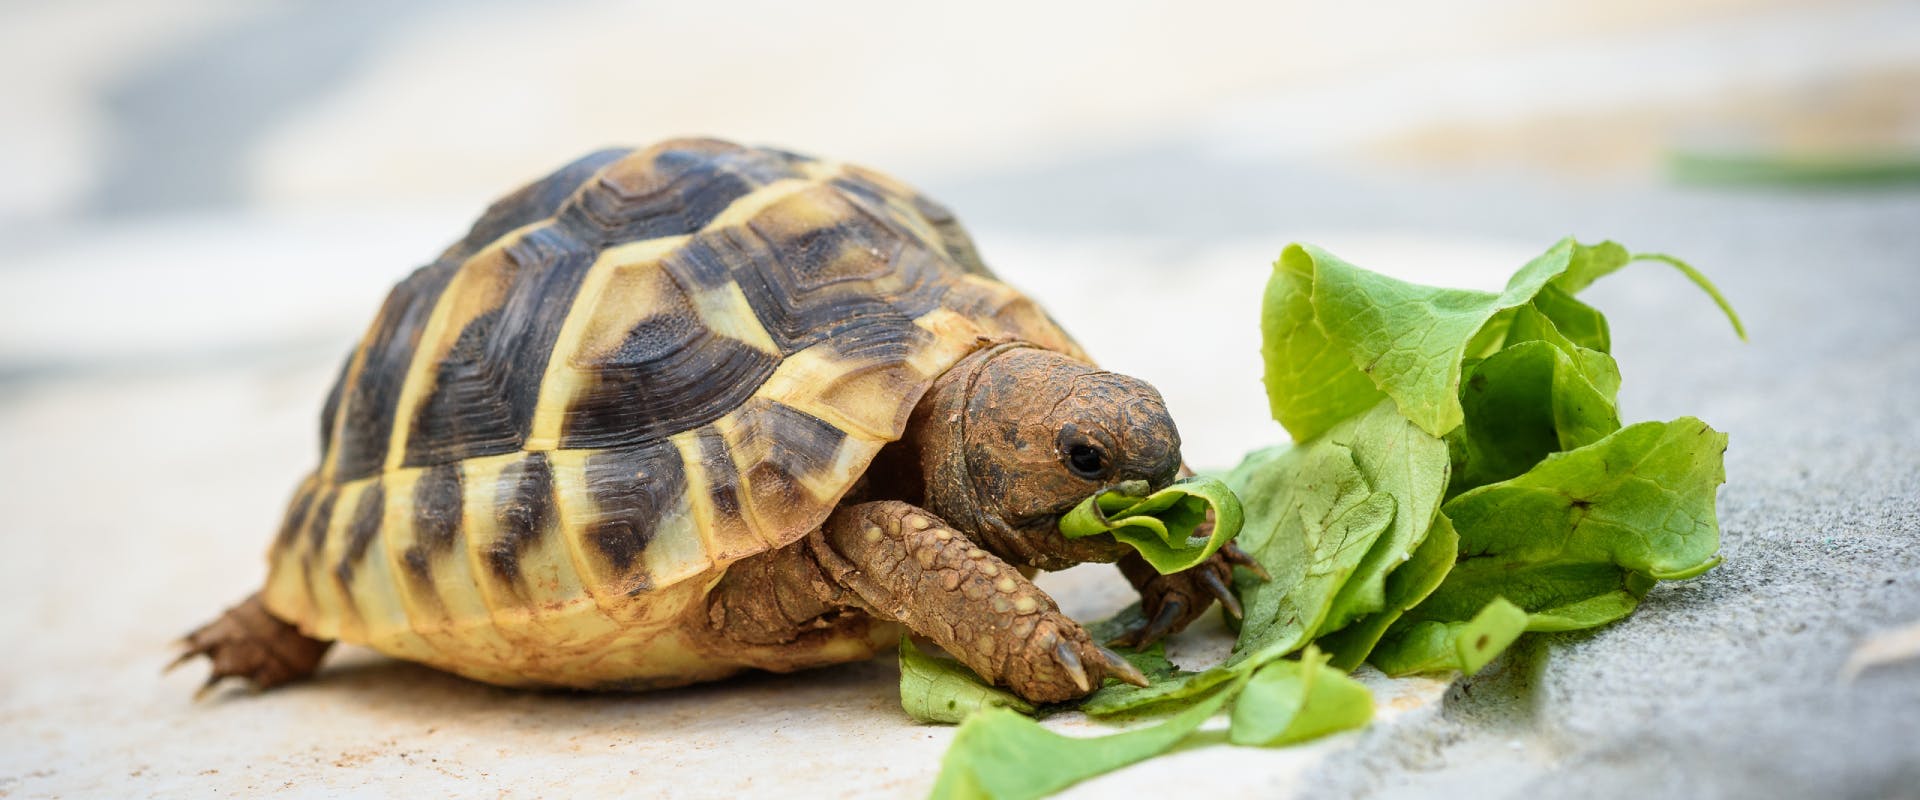 a small tortoise munching on a large green leaf